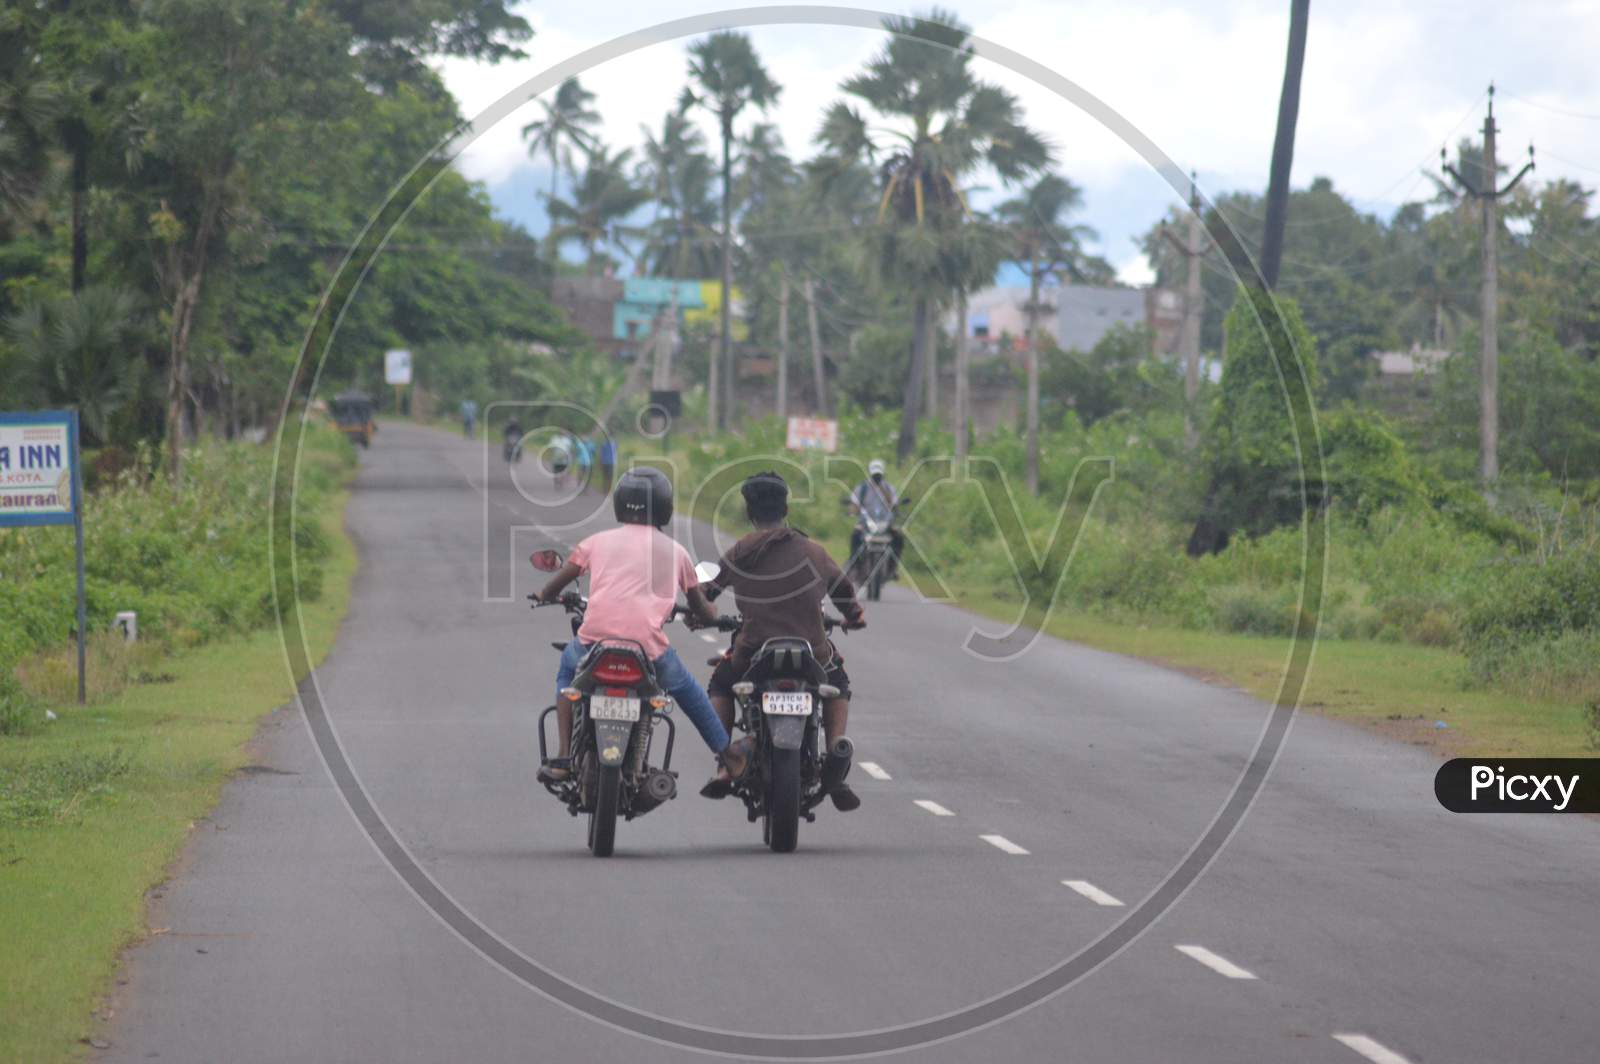 A motorcyclist helping other motorcyclist when out of fuel in Indian village roads